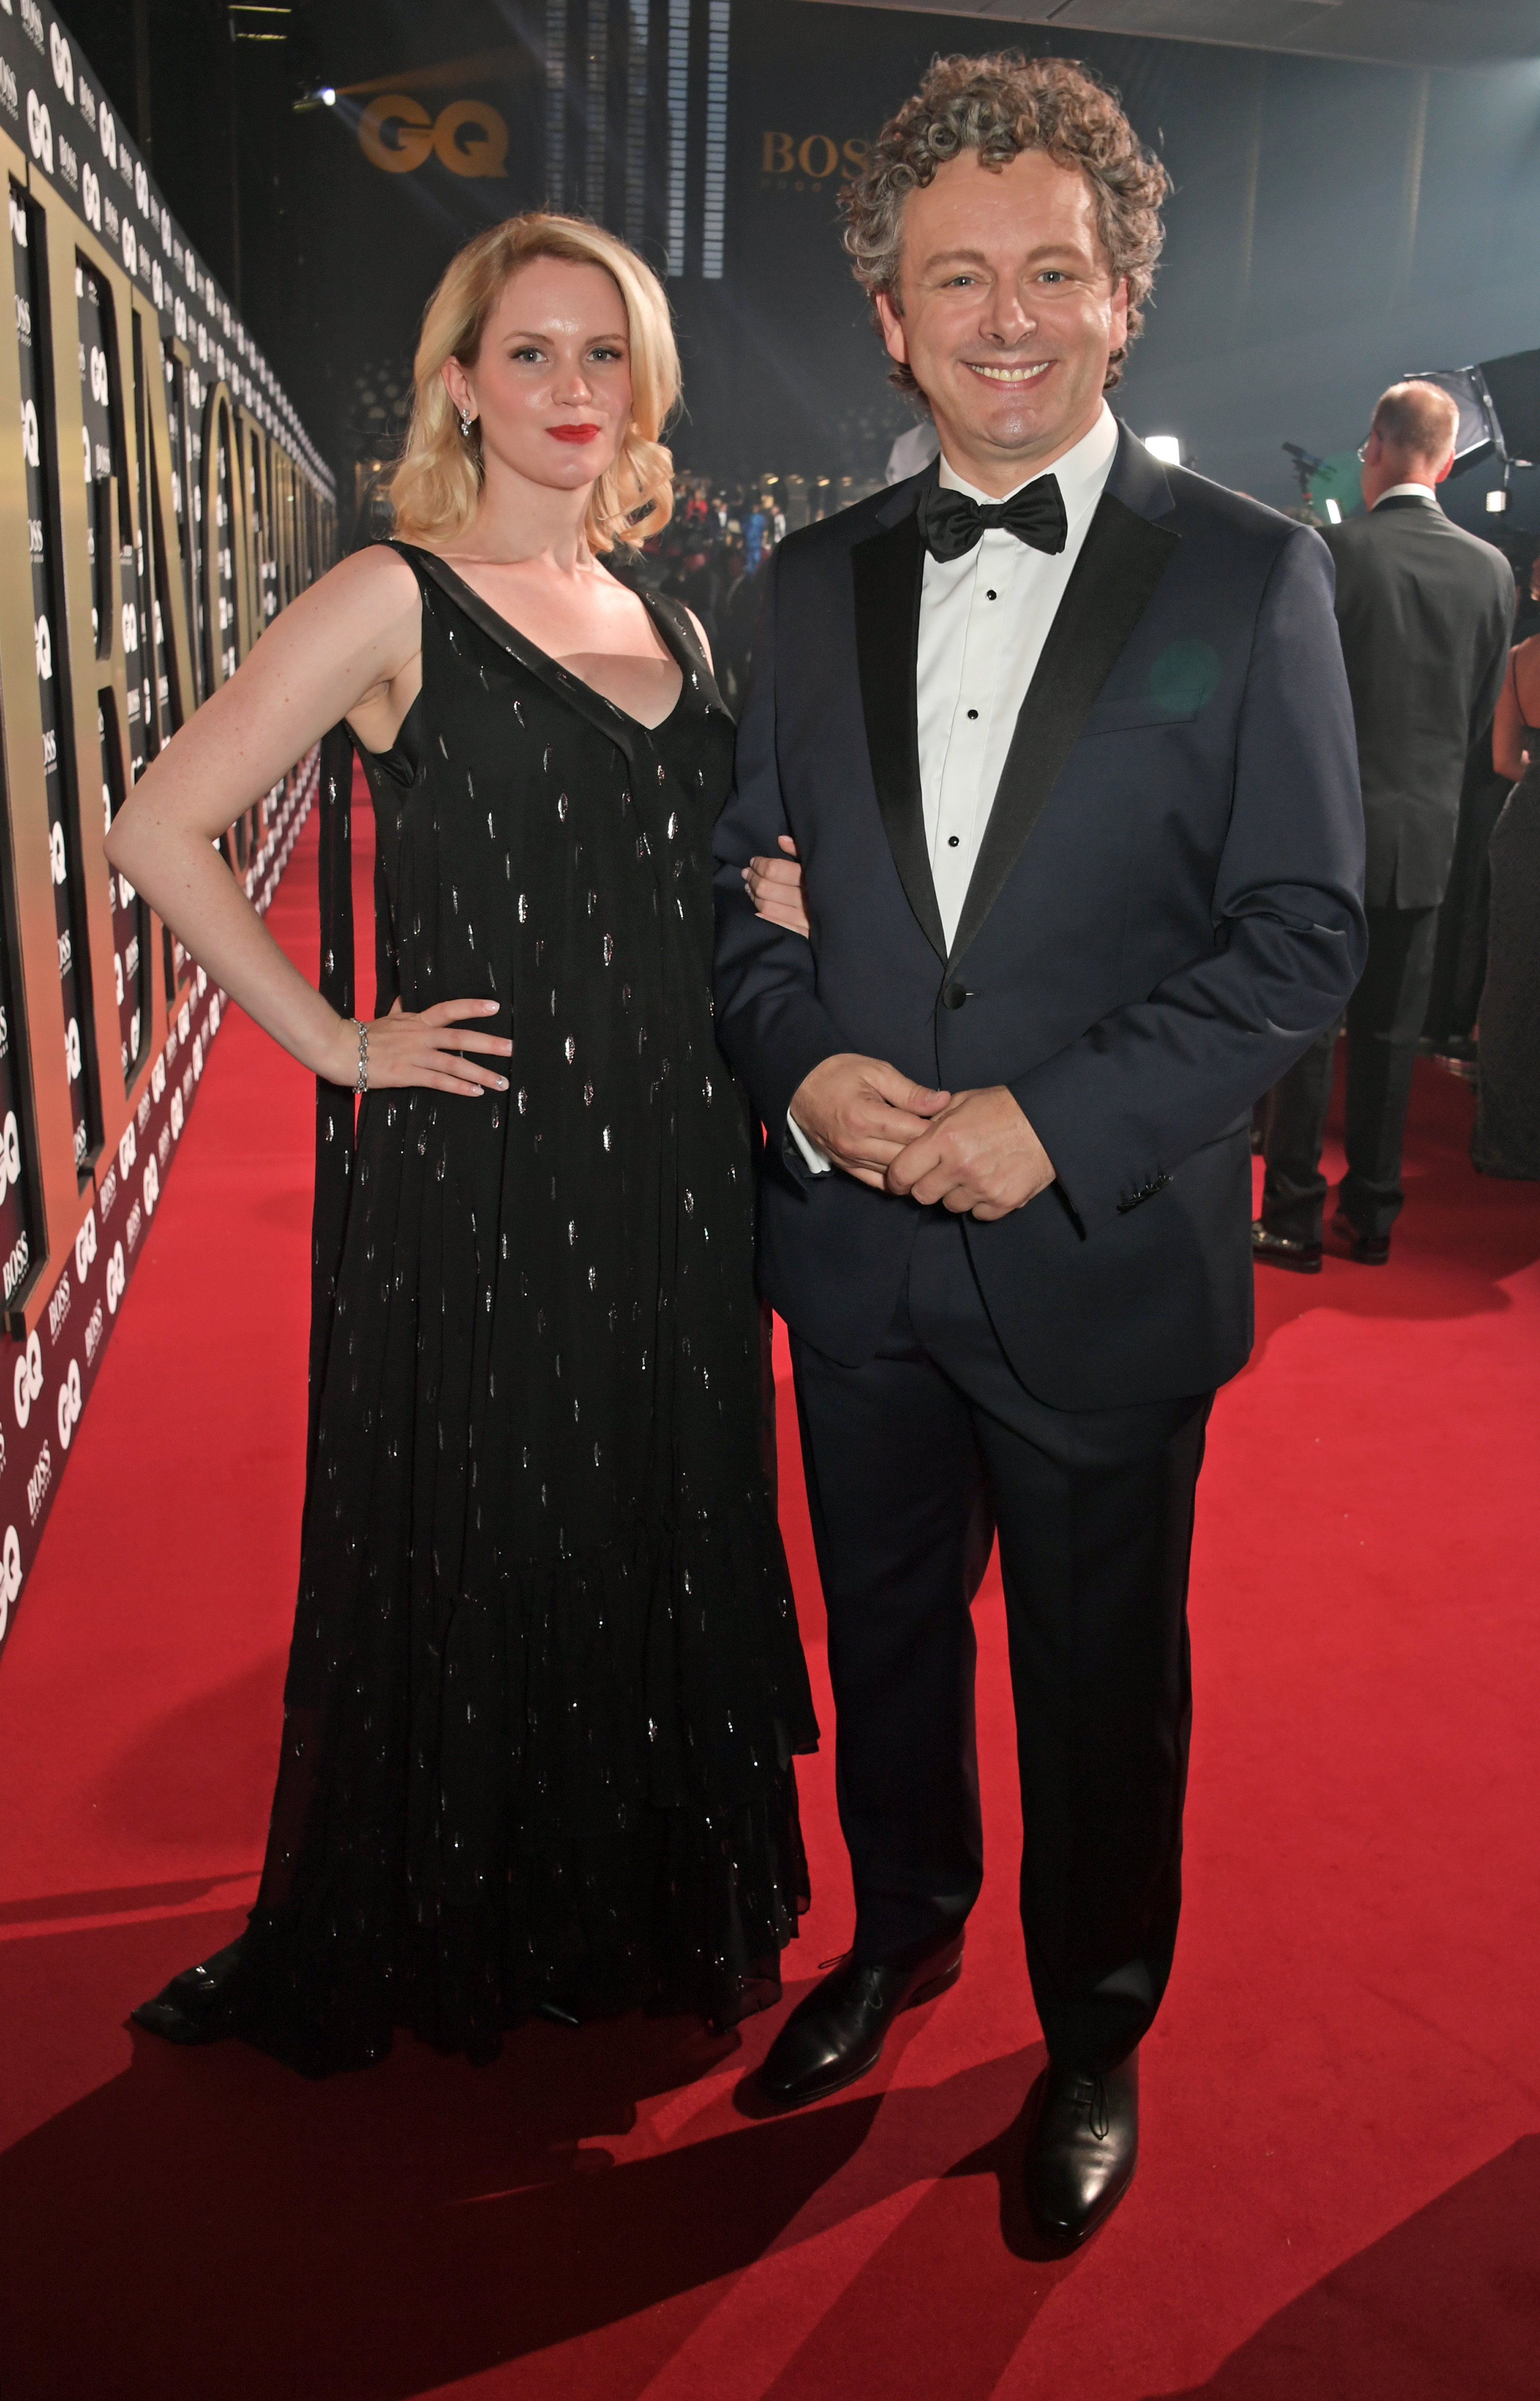     Anna Lundberg and Michael Sheen pose at the GQ Men Of The Year Awards 2019 on September 3, 2019 in London |  Source: Getty Images